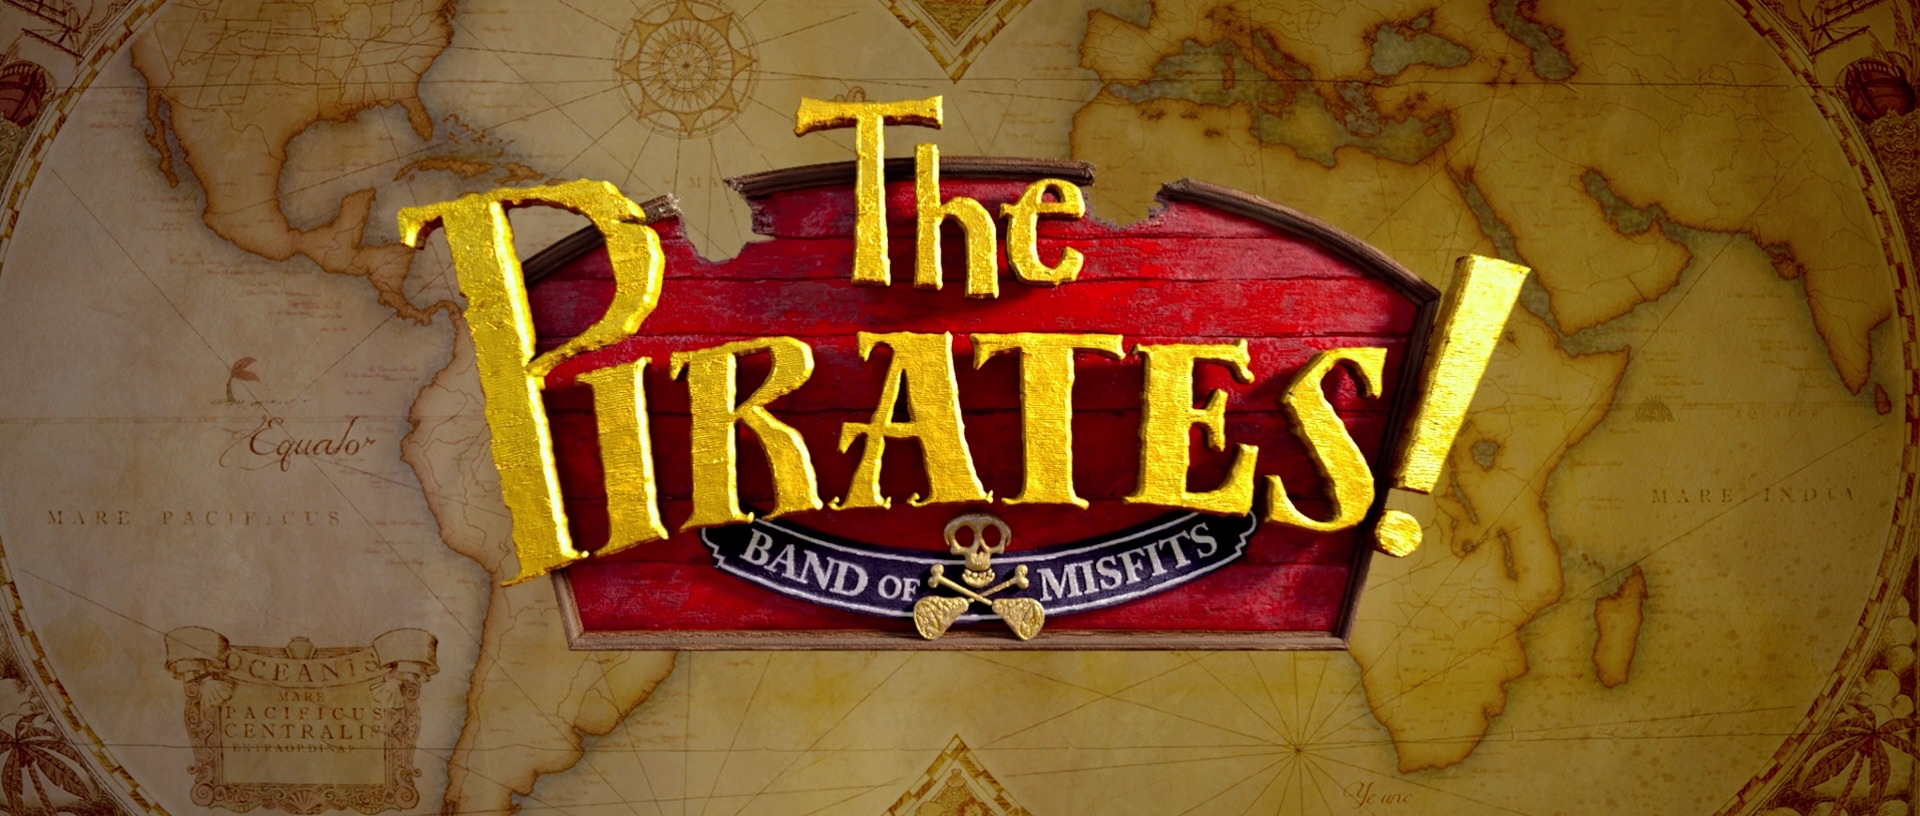 The Pirates! Band of Misfits